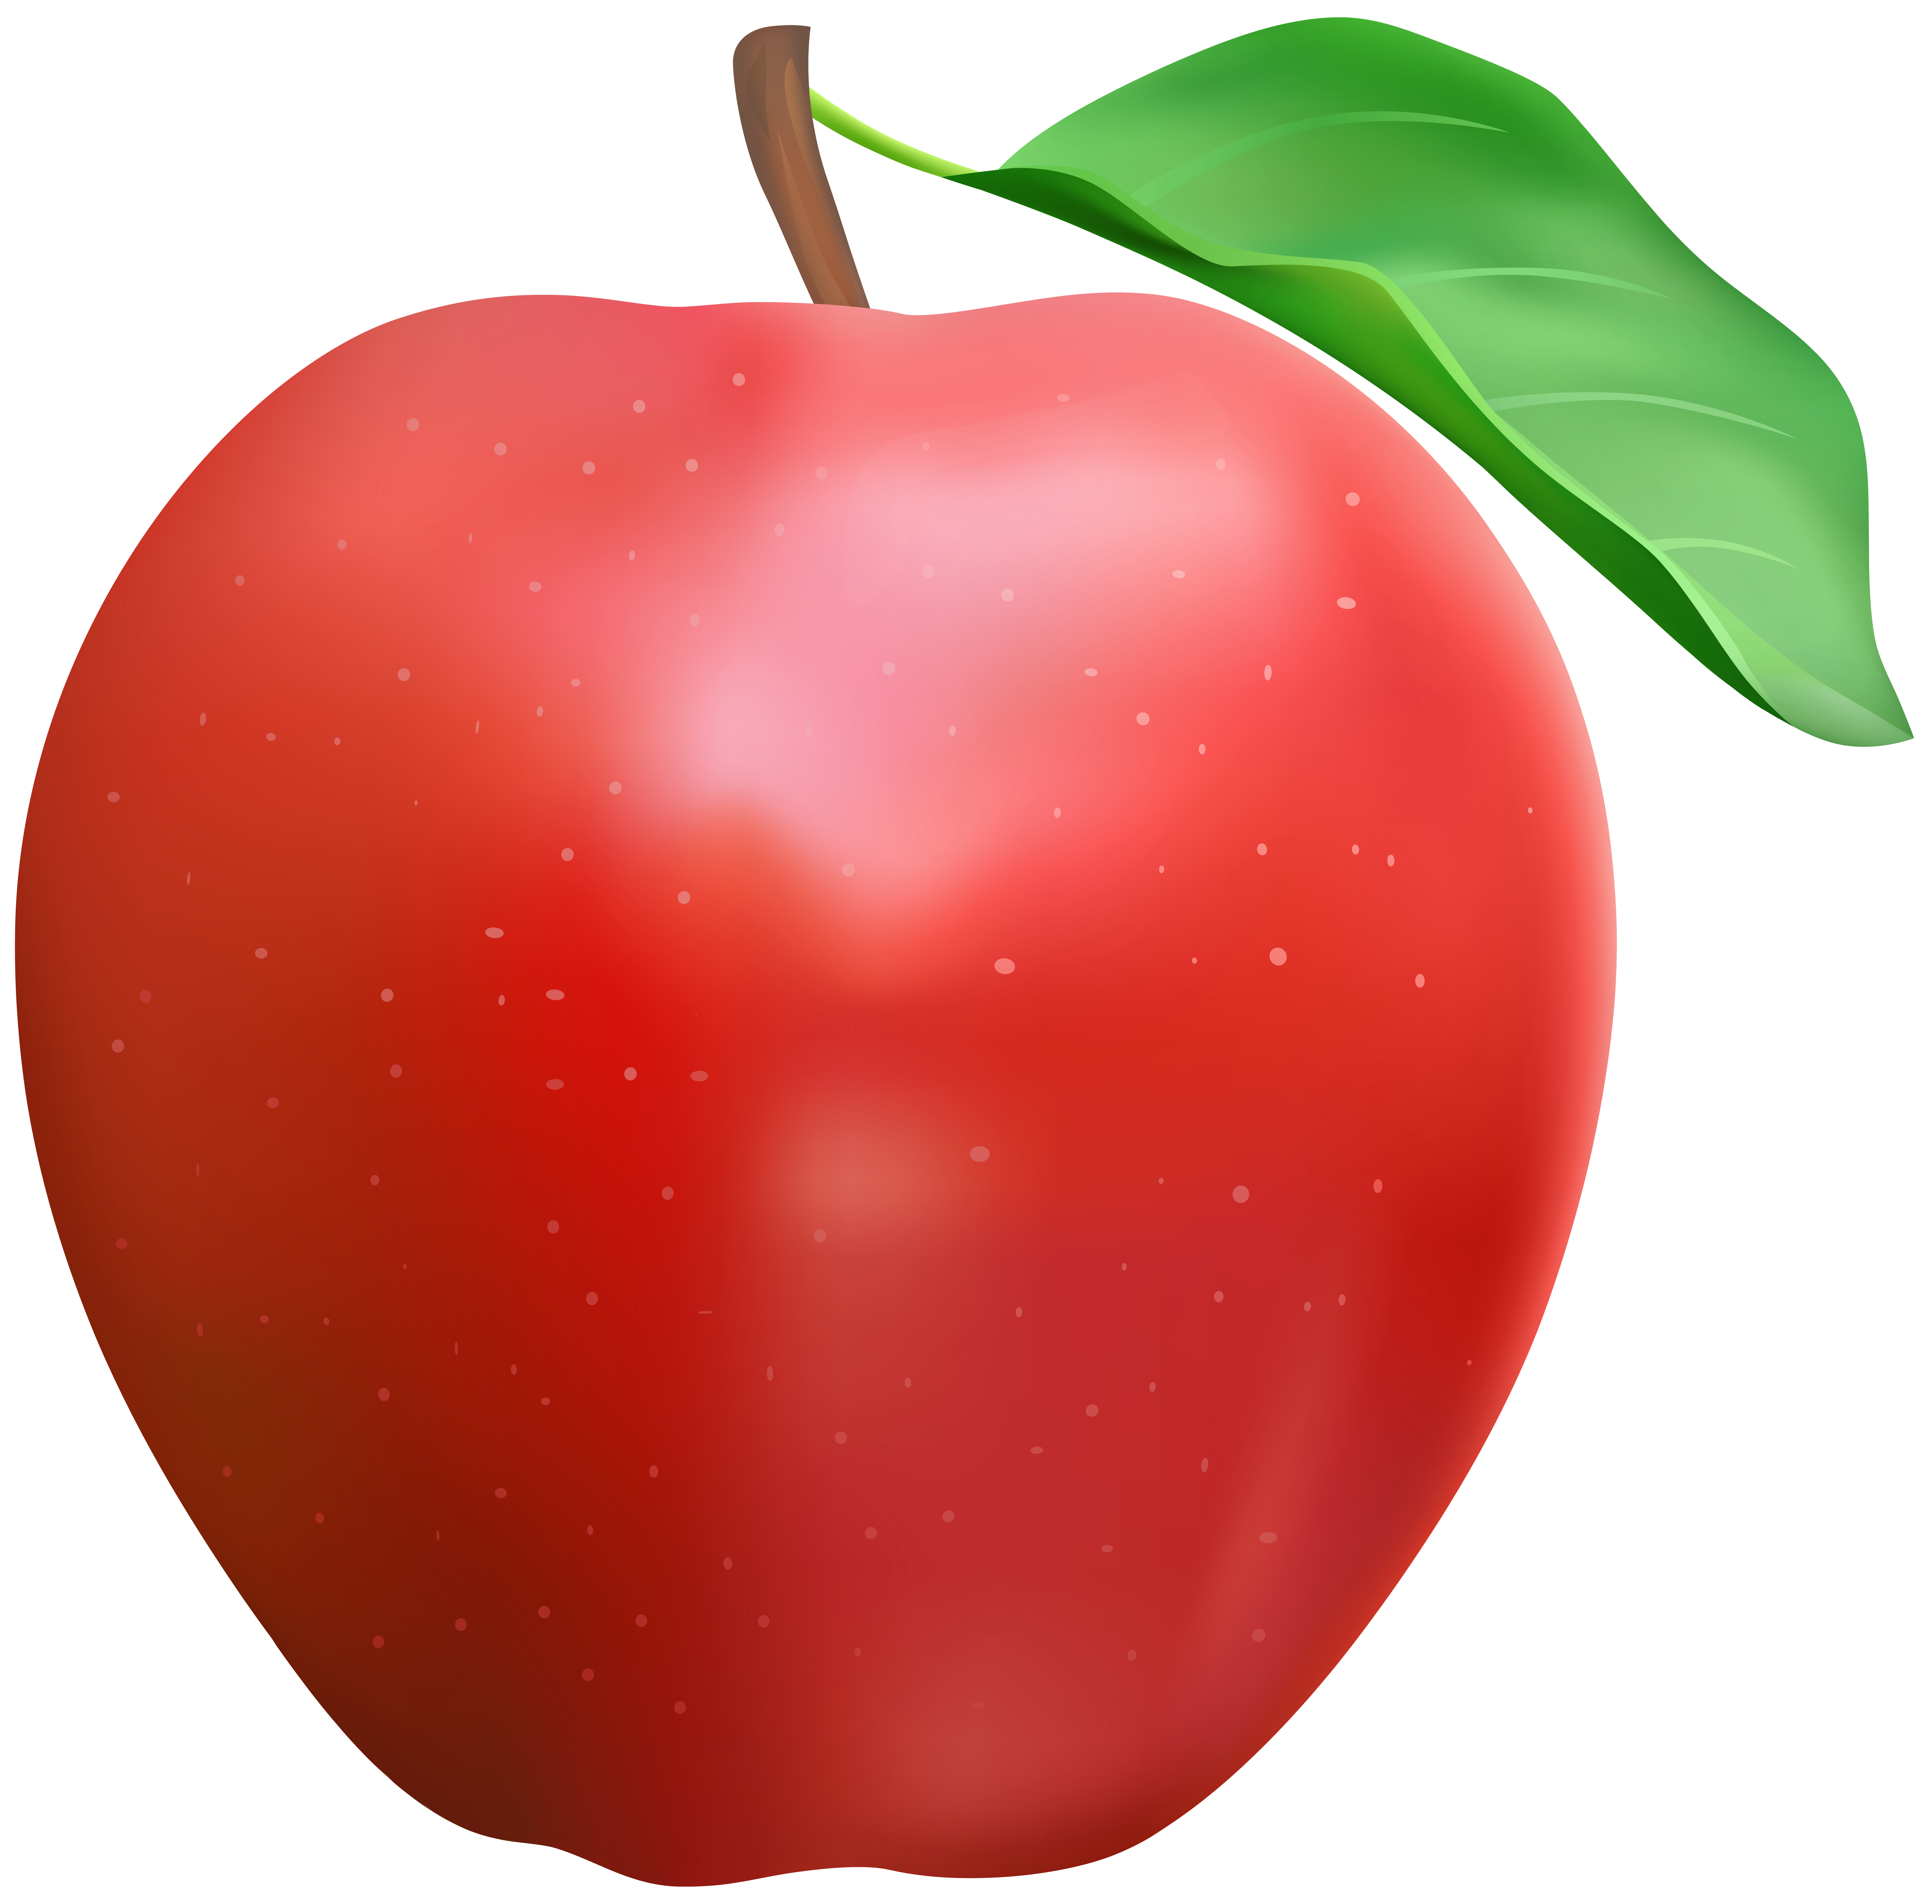 https://gallery.yopriceville.com/var/albums/Free-Clipart-Pictures/Fruit-PNG/Red_Apple_with_leaf_PNG_Transparent_Clipart.png?m=1652179584